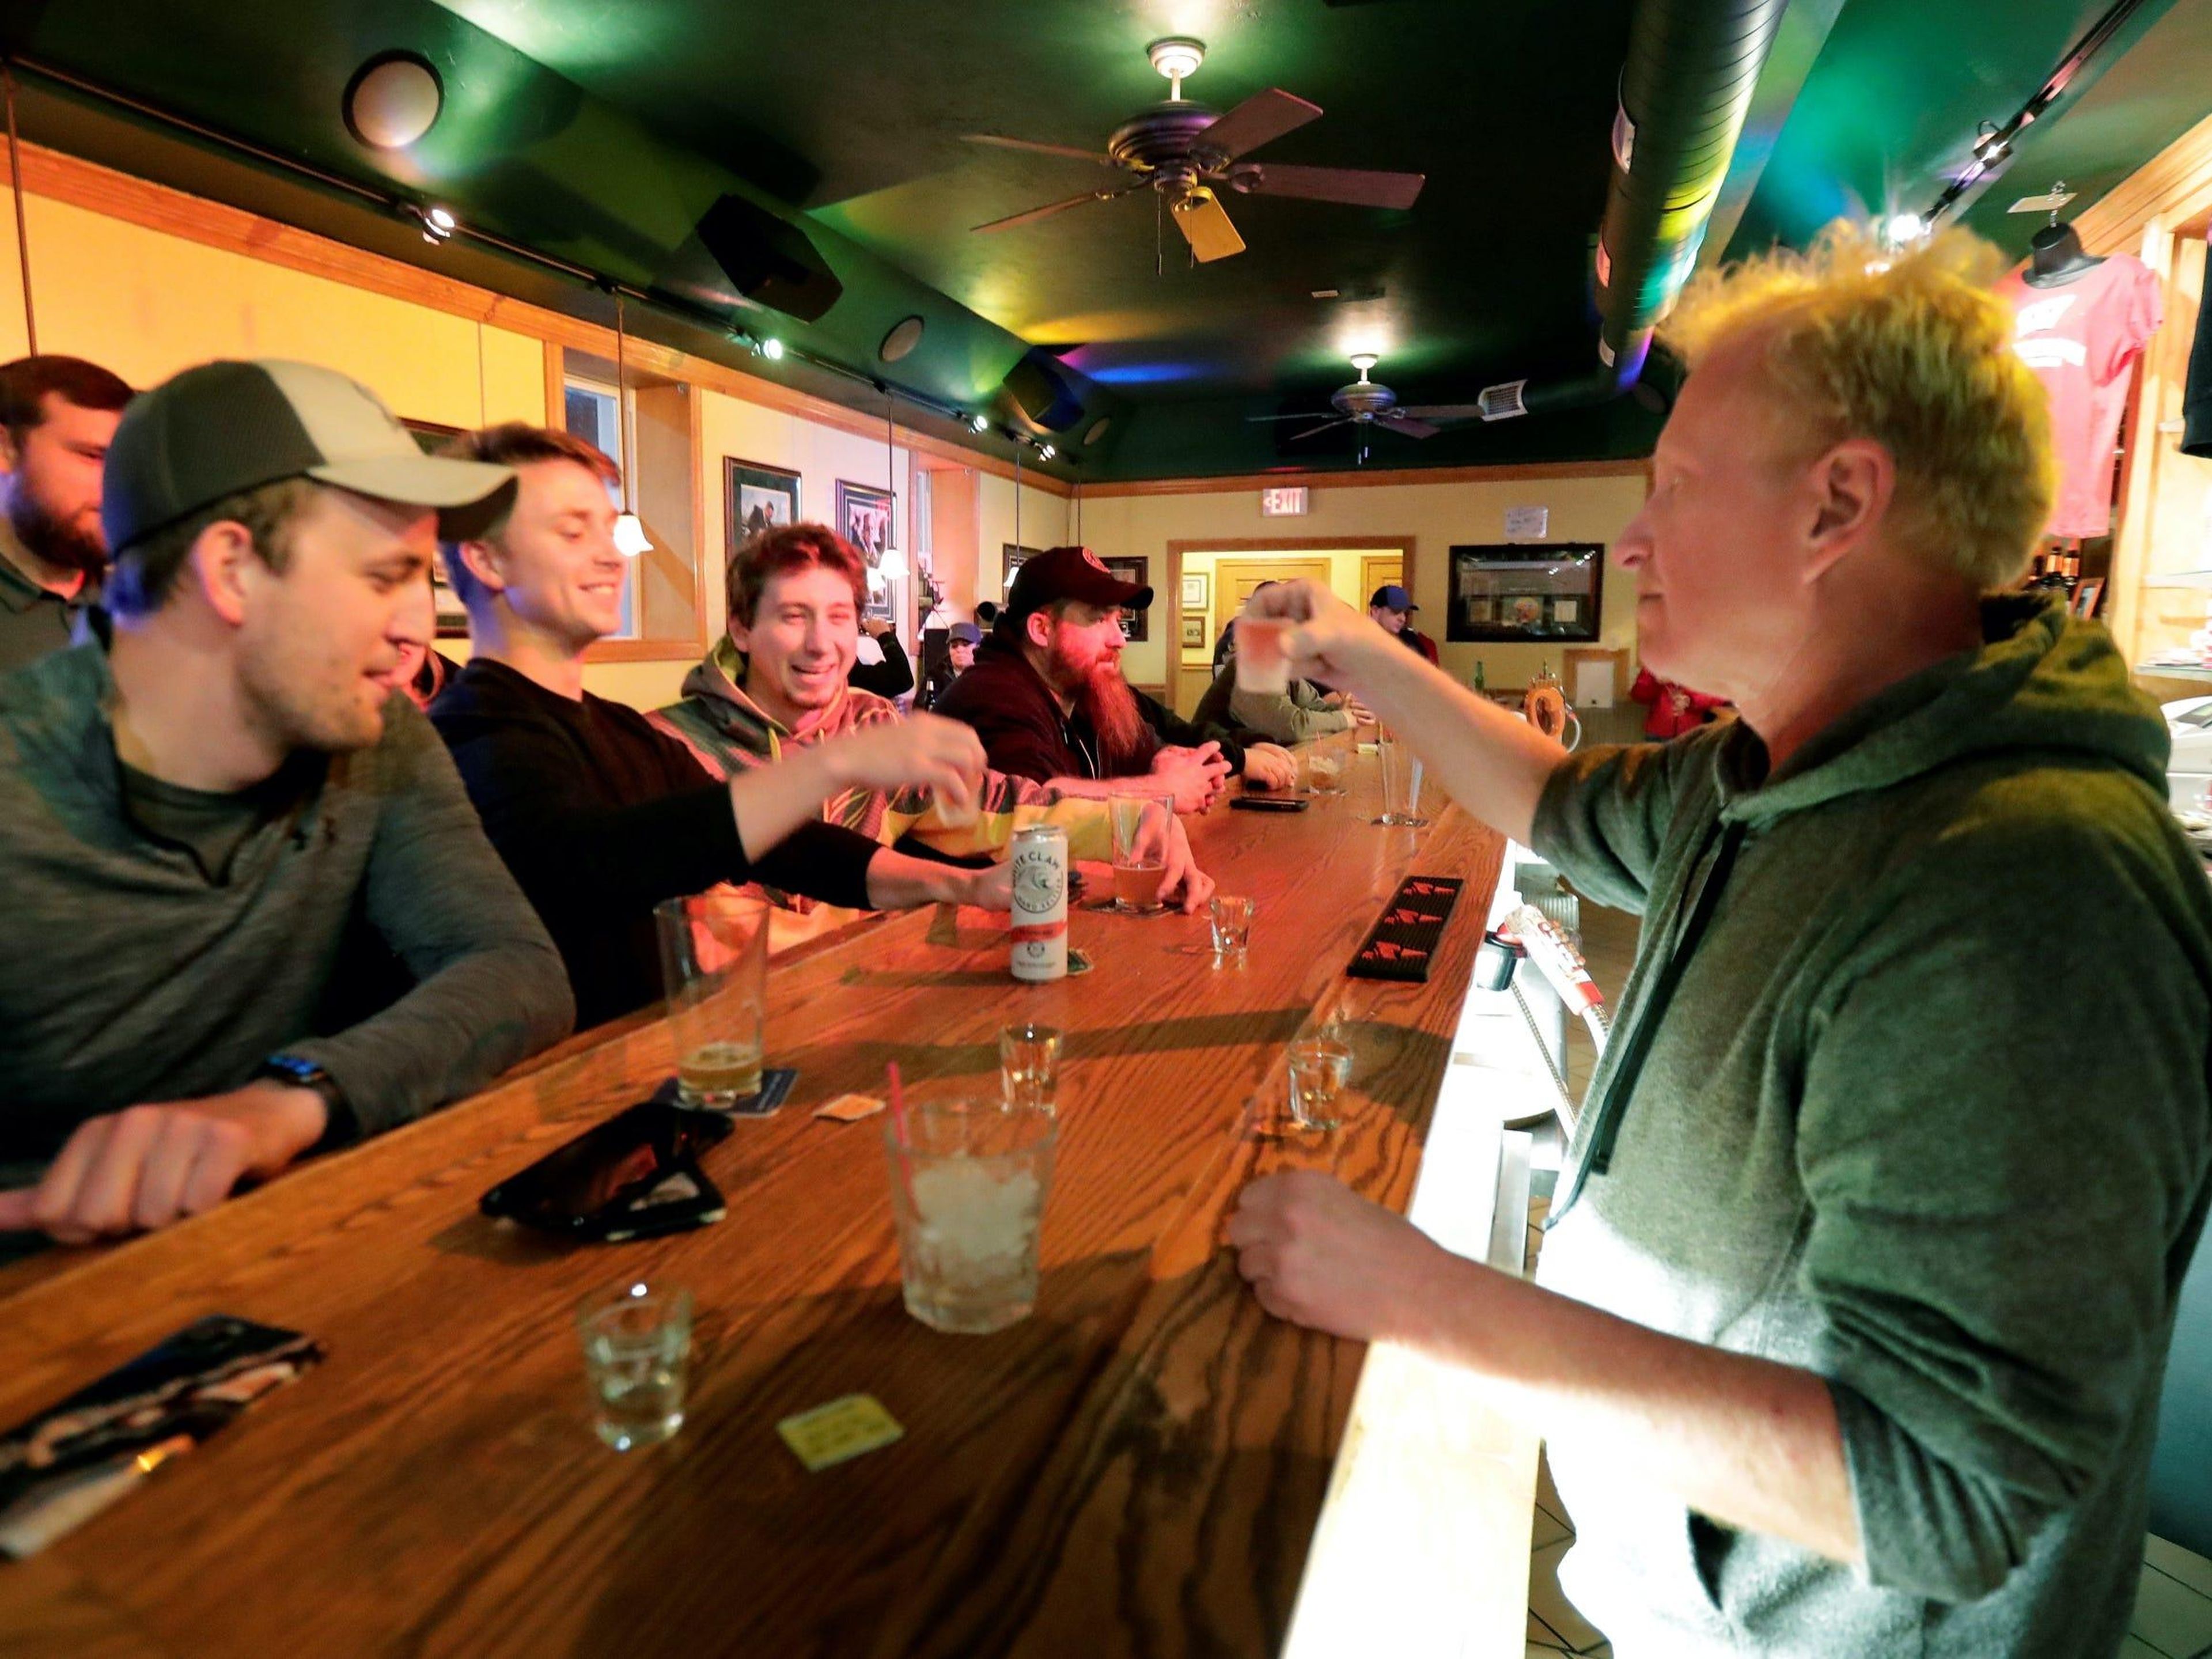 People toast the reopening of the Friends and Neighbors bar in Appleton, Wisconsin, following the Wisconsin Supreme Court's decision to strike down Gov. Tony Evers' safer-at-home order on May 13.